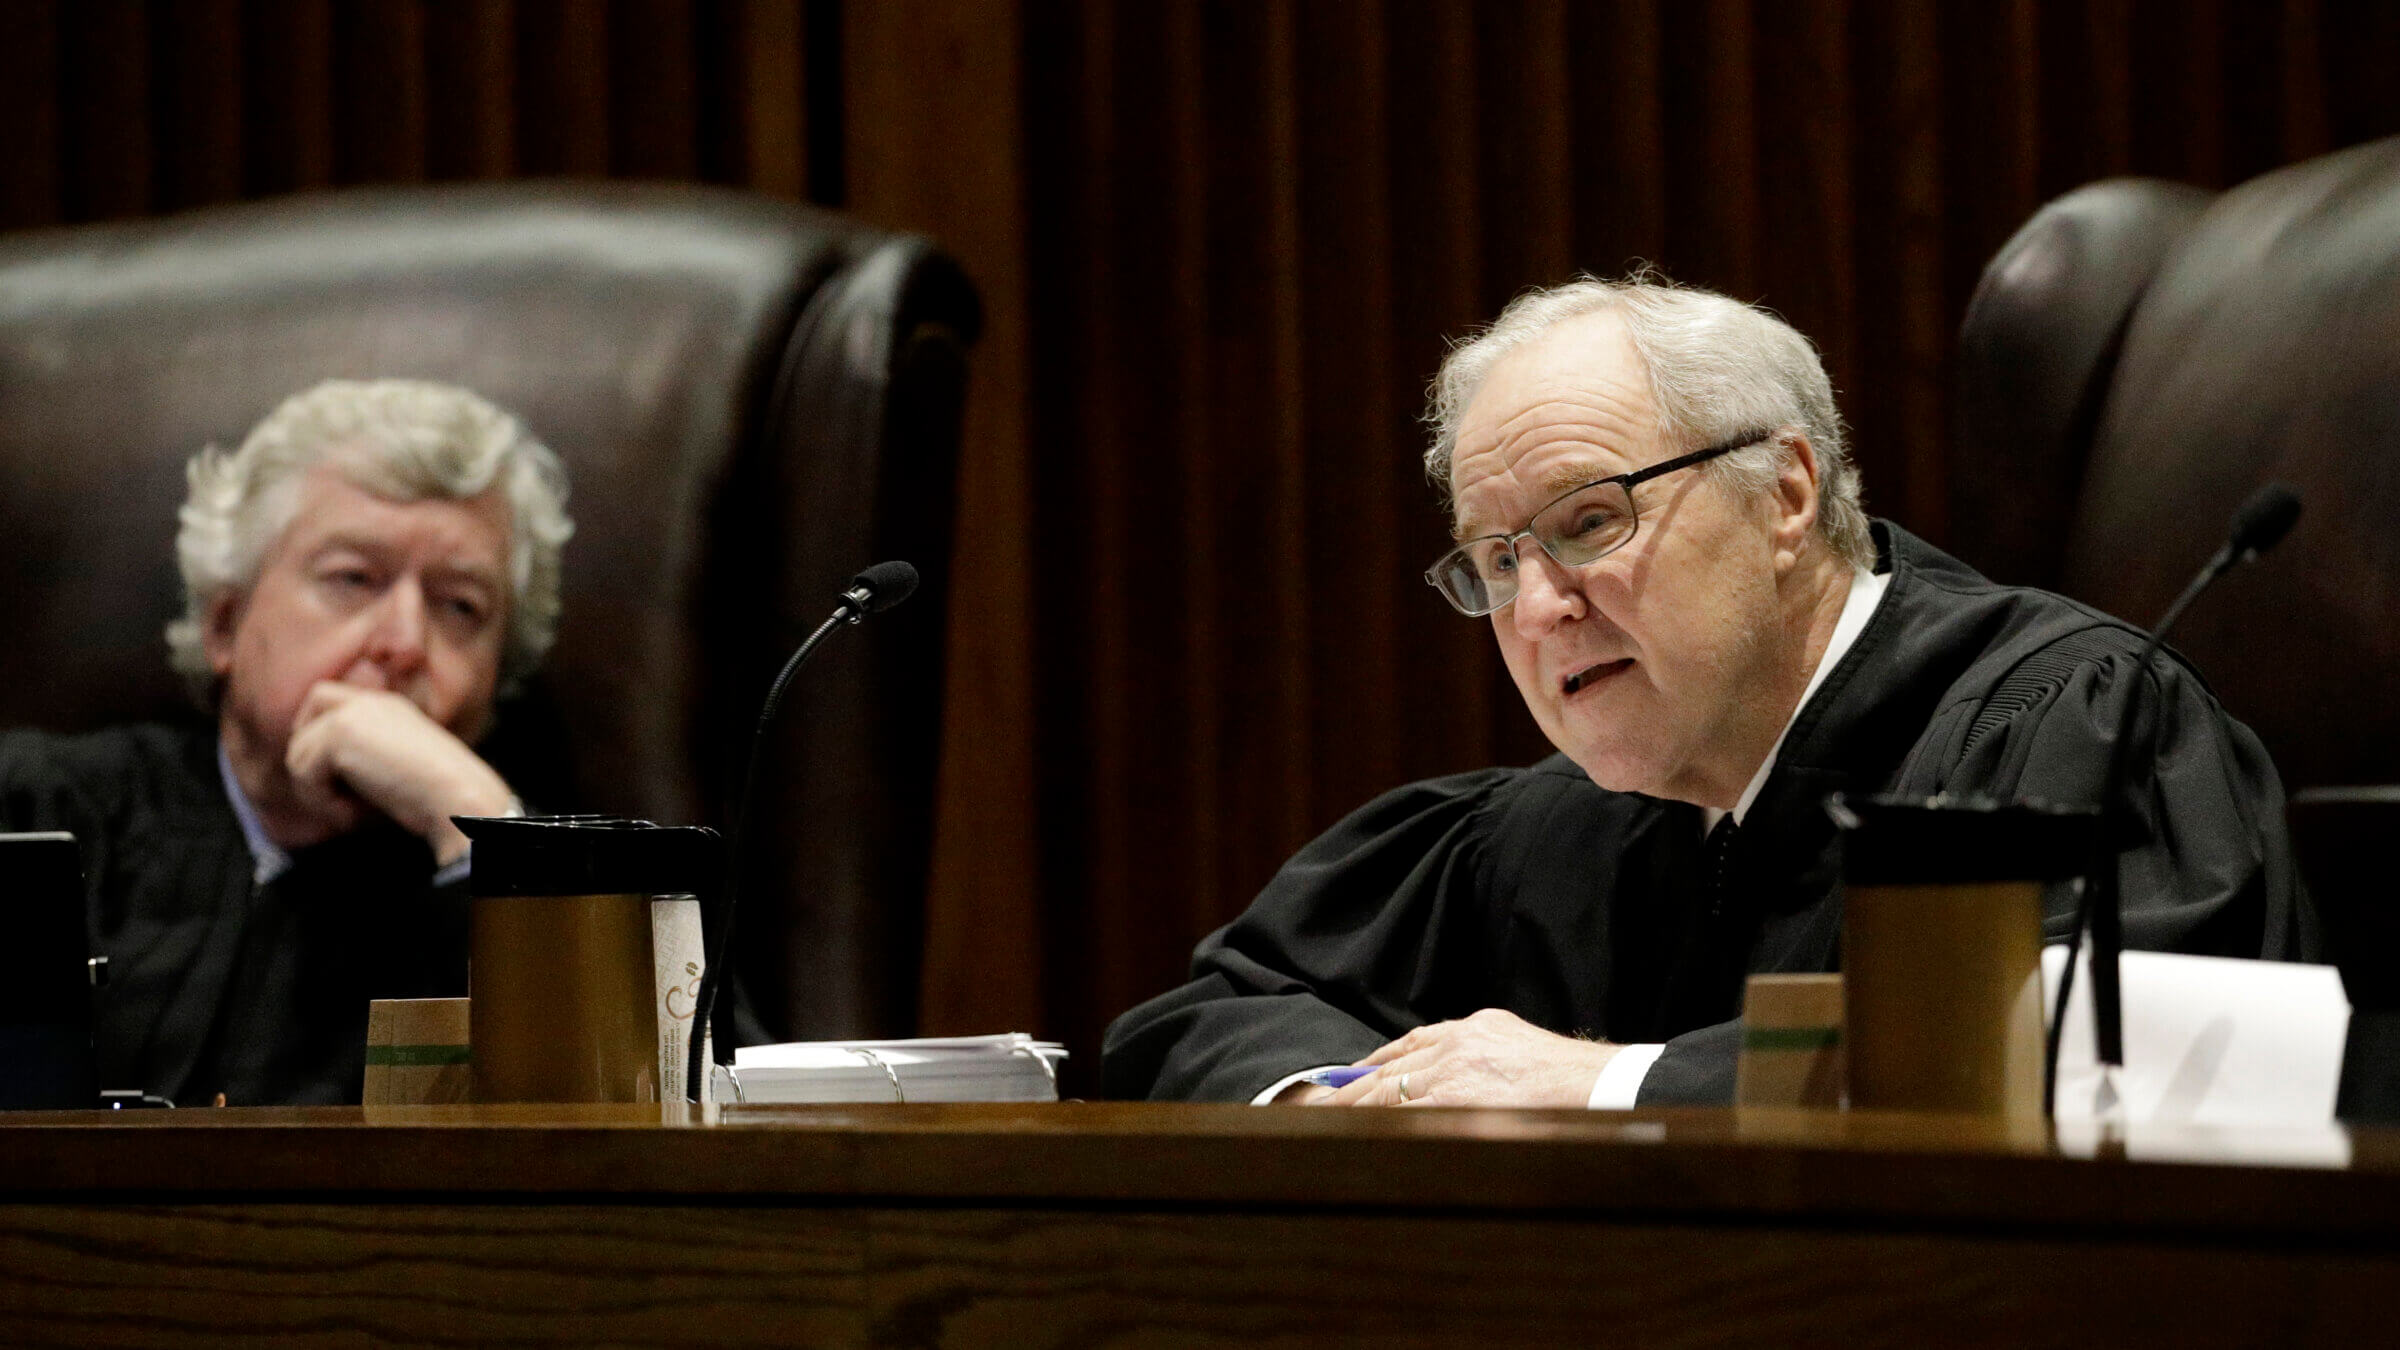 Kansas Supreme Court Justice Eric Rosen, right, was part of a 6-1 ruling in 2019 that found the state constitution protected the right to abortion. Opponents of the procedure attempted to overturn that decision with a ballot measure but voters overwhelmingly rejected it Tuesday, in a closely watched contest that followed overturning of Roe v. Wade in June.